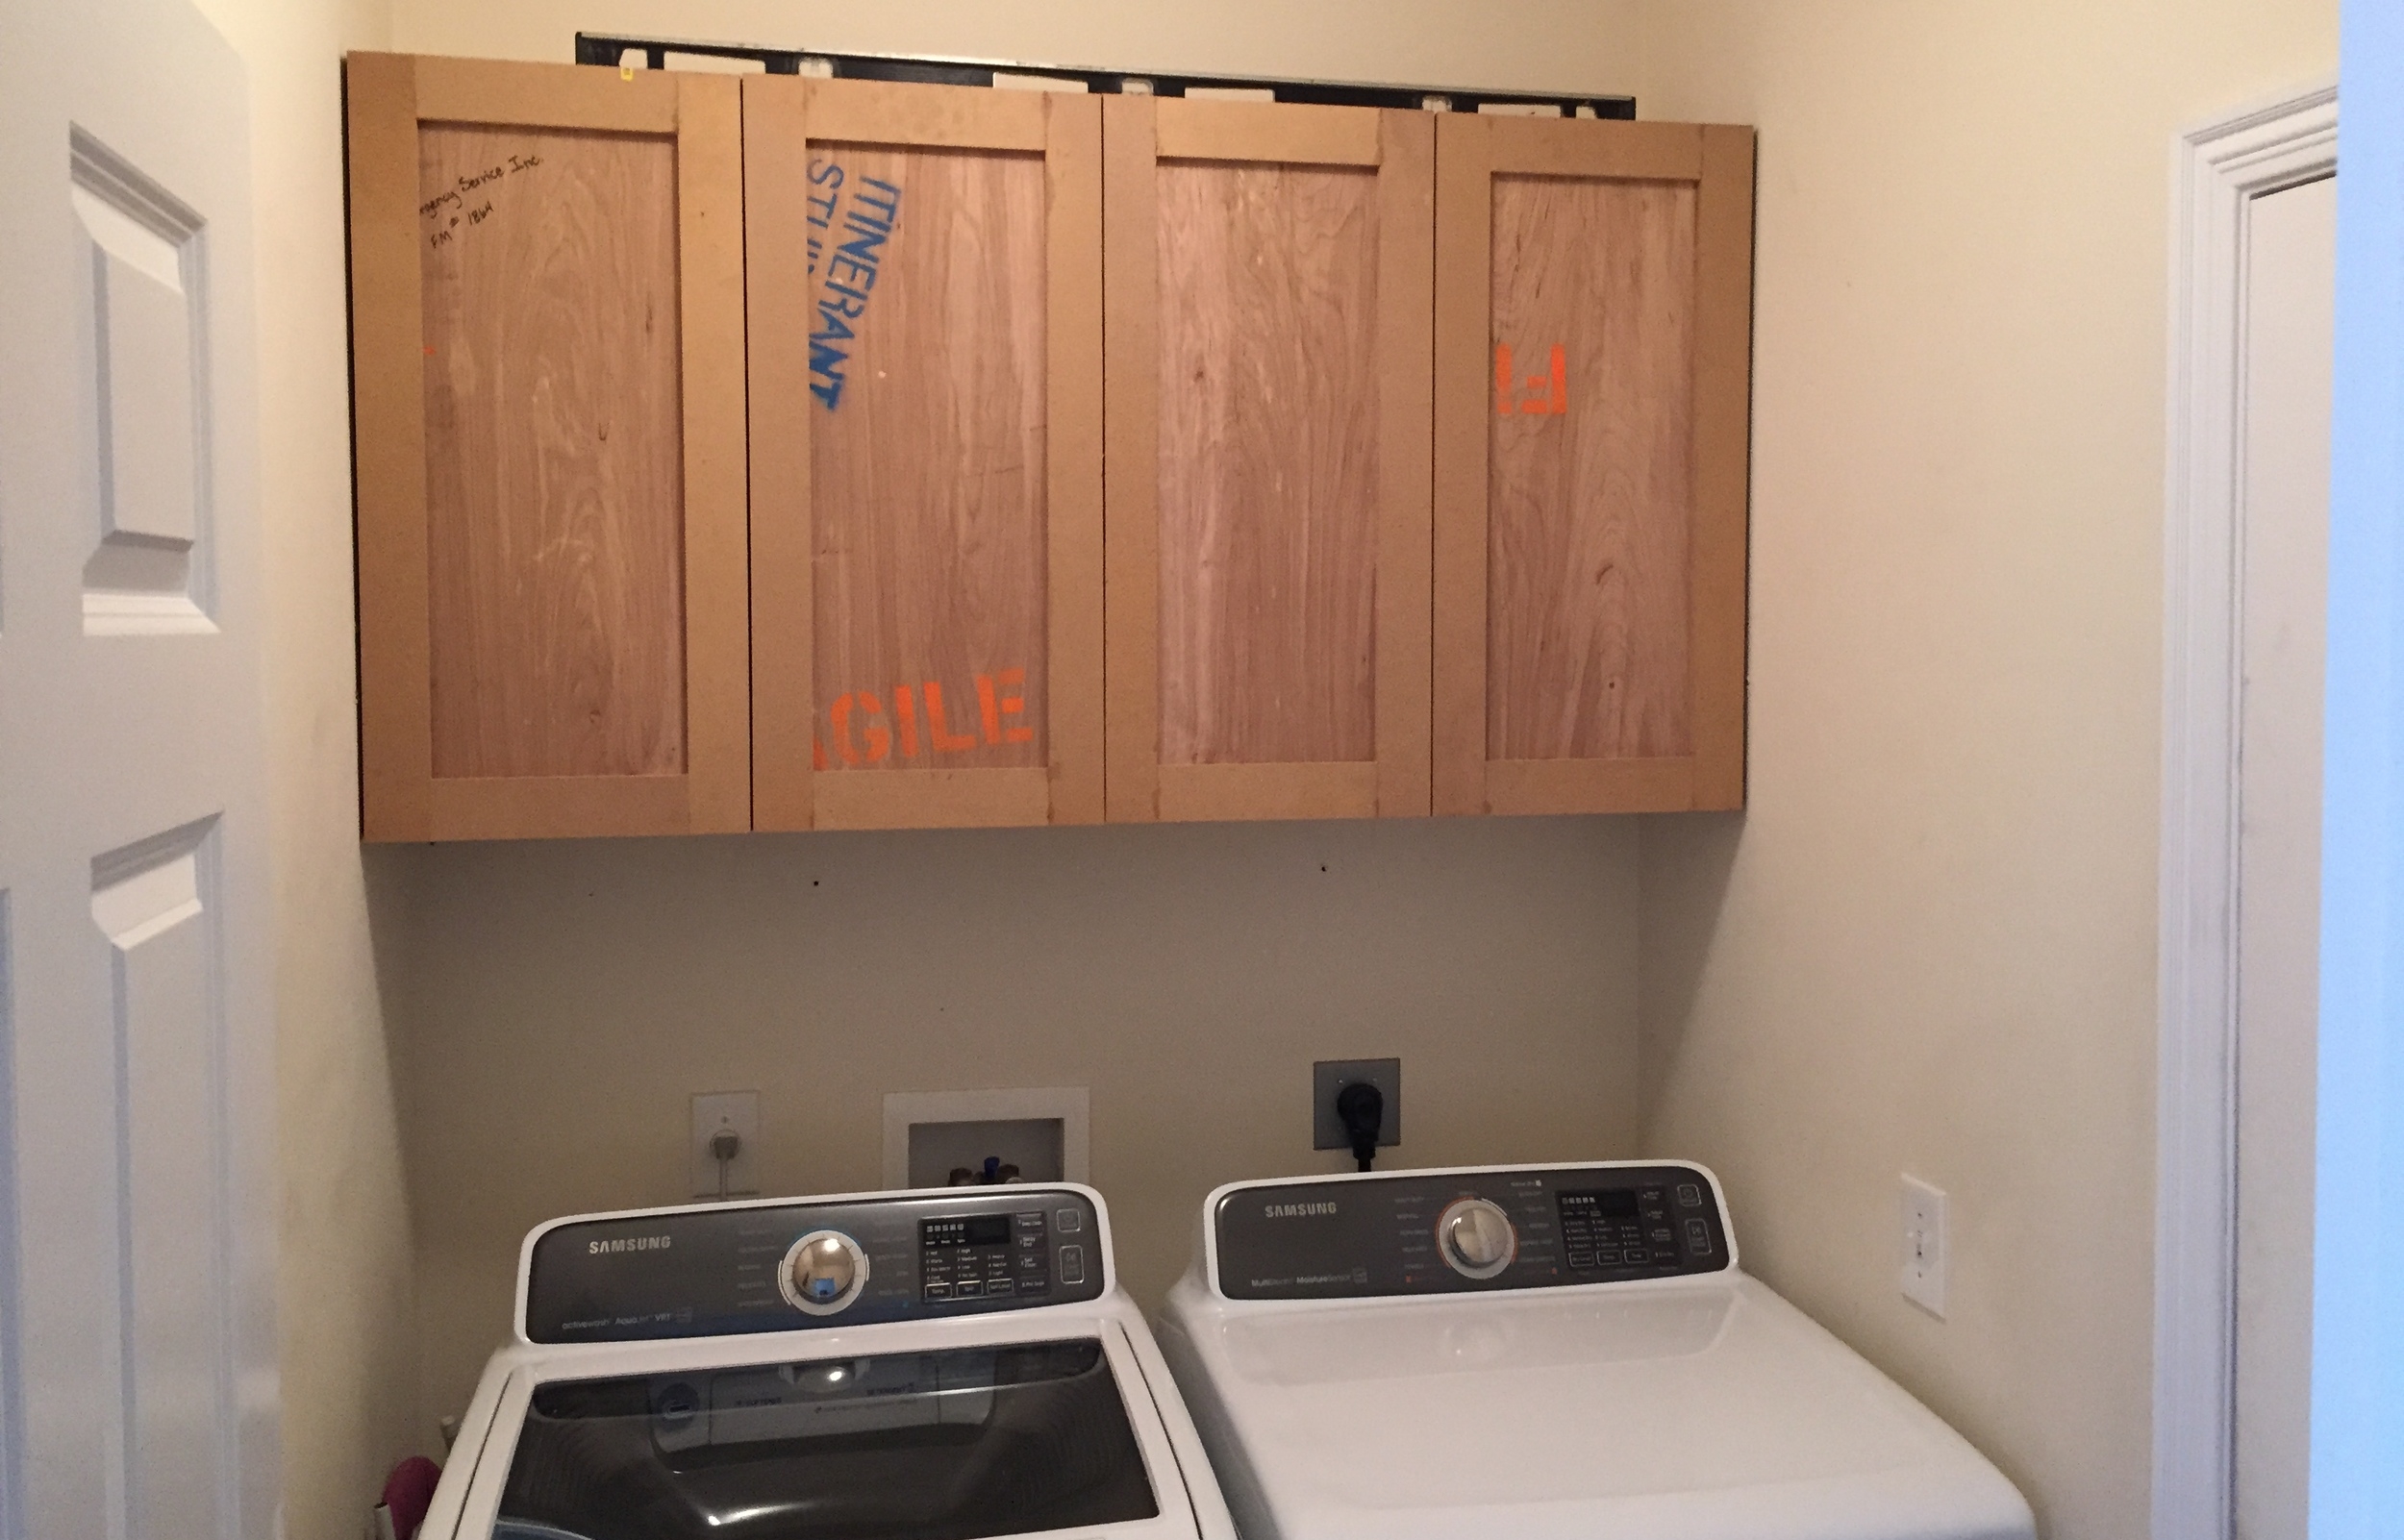 Upper Cabinets Laundry Room Makeover, How To Diy Laundry Room Cabinets